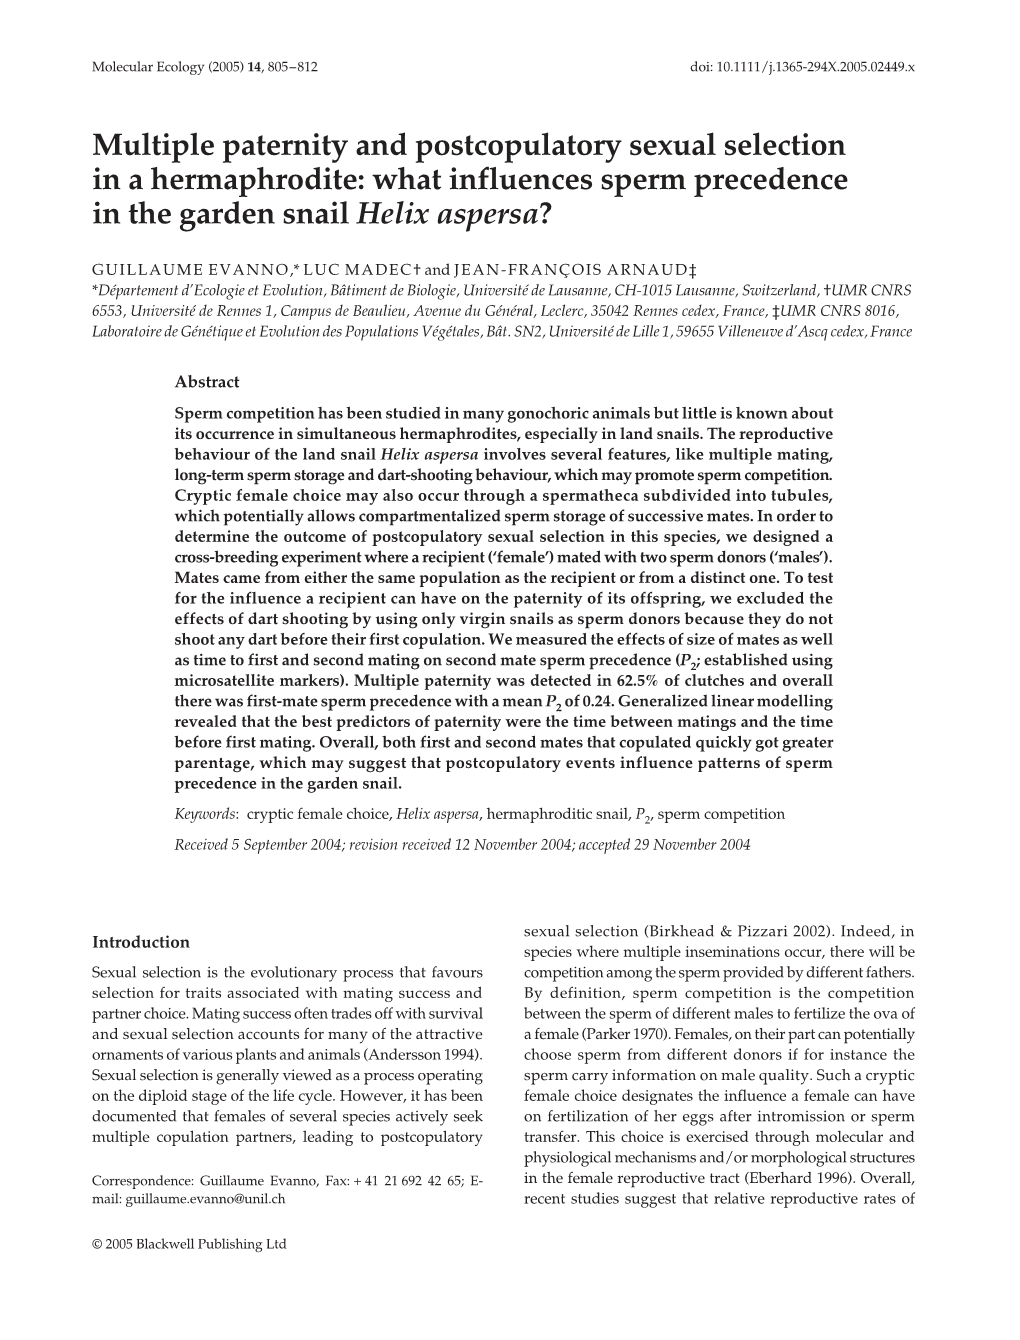 Multiple Paternity and Postcopulatory Sexual Selection in a Hermaphrodite: What Influences Sperm Precedence in the Garden Snail